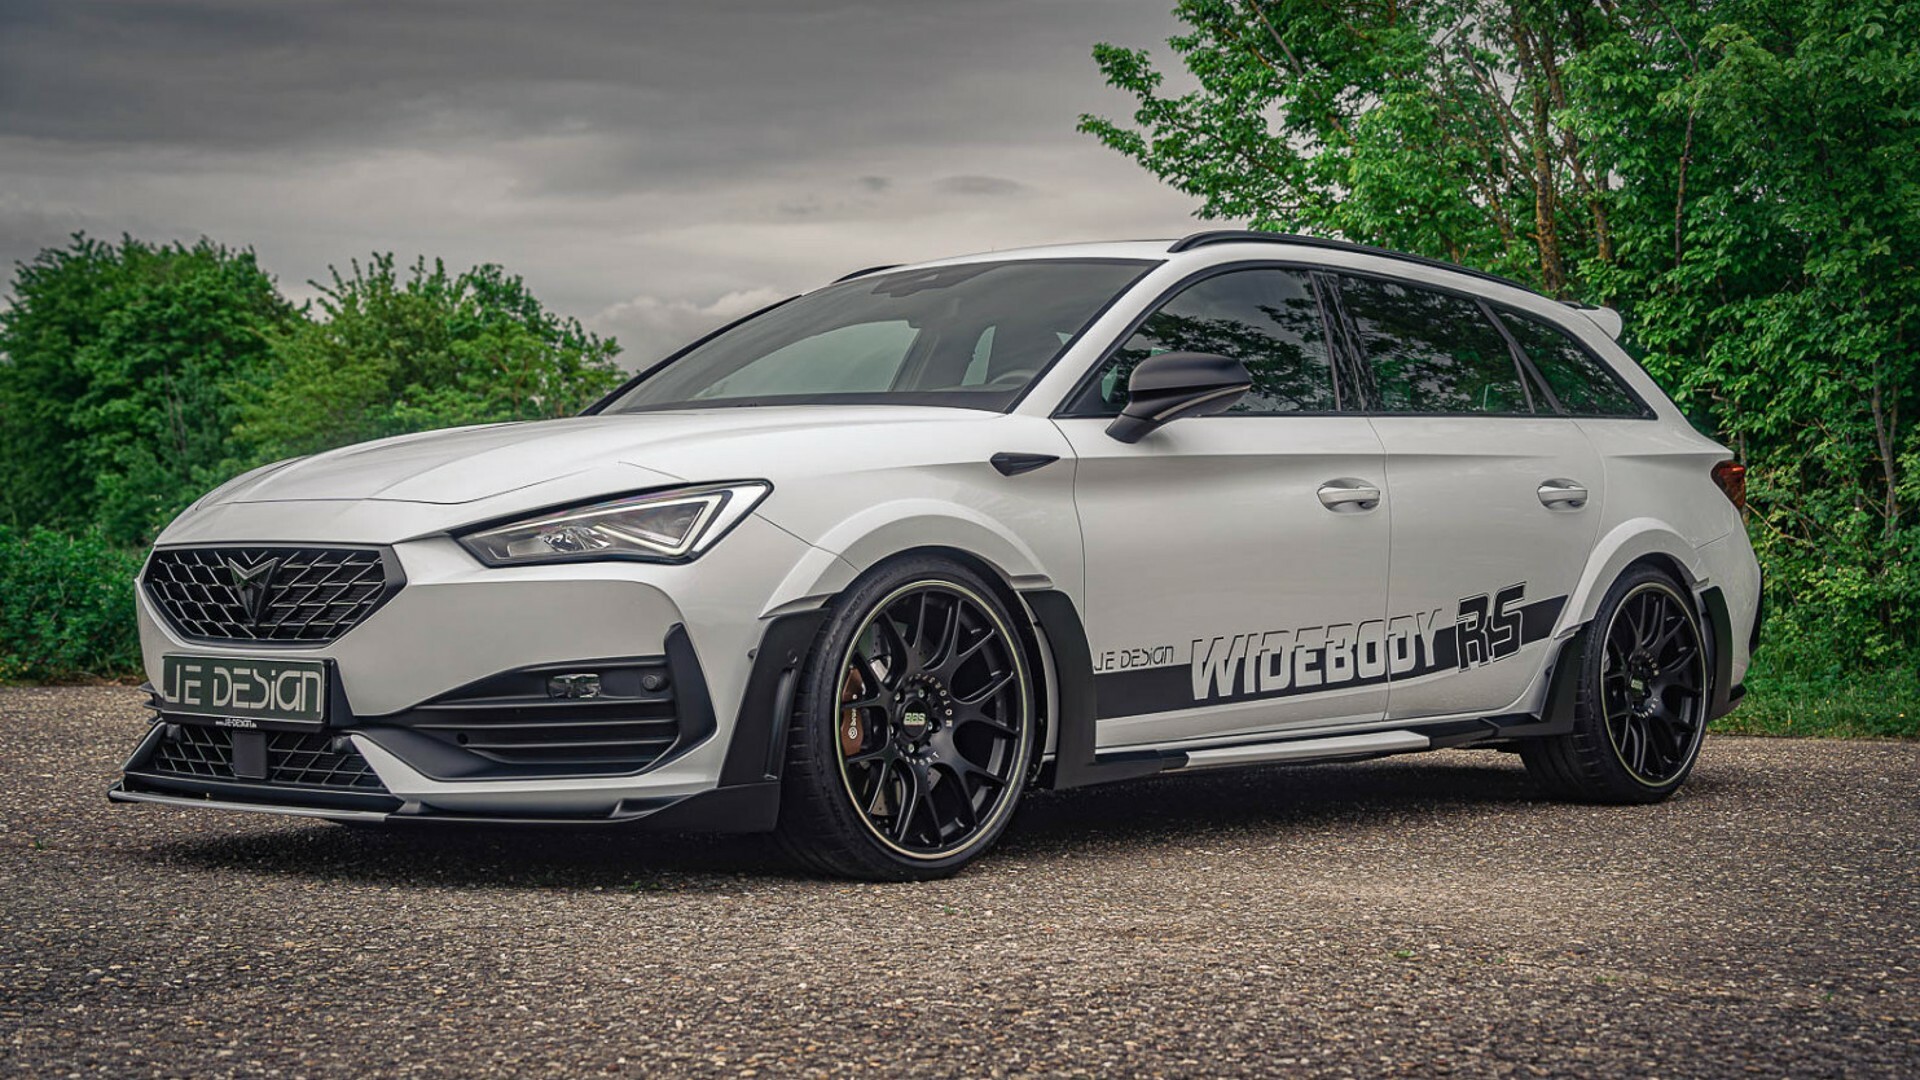 Cupra Leon Sports Tourer Spiced Up From JE Design With Wide Bodykit And 365  HP